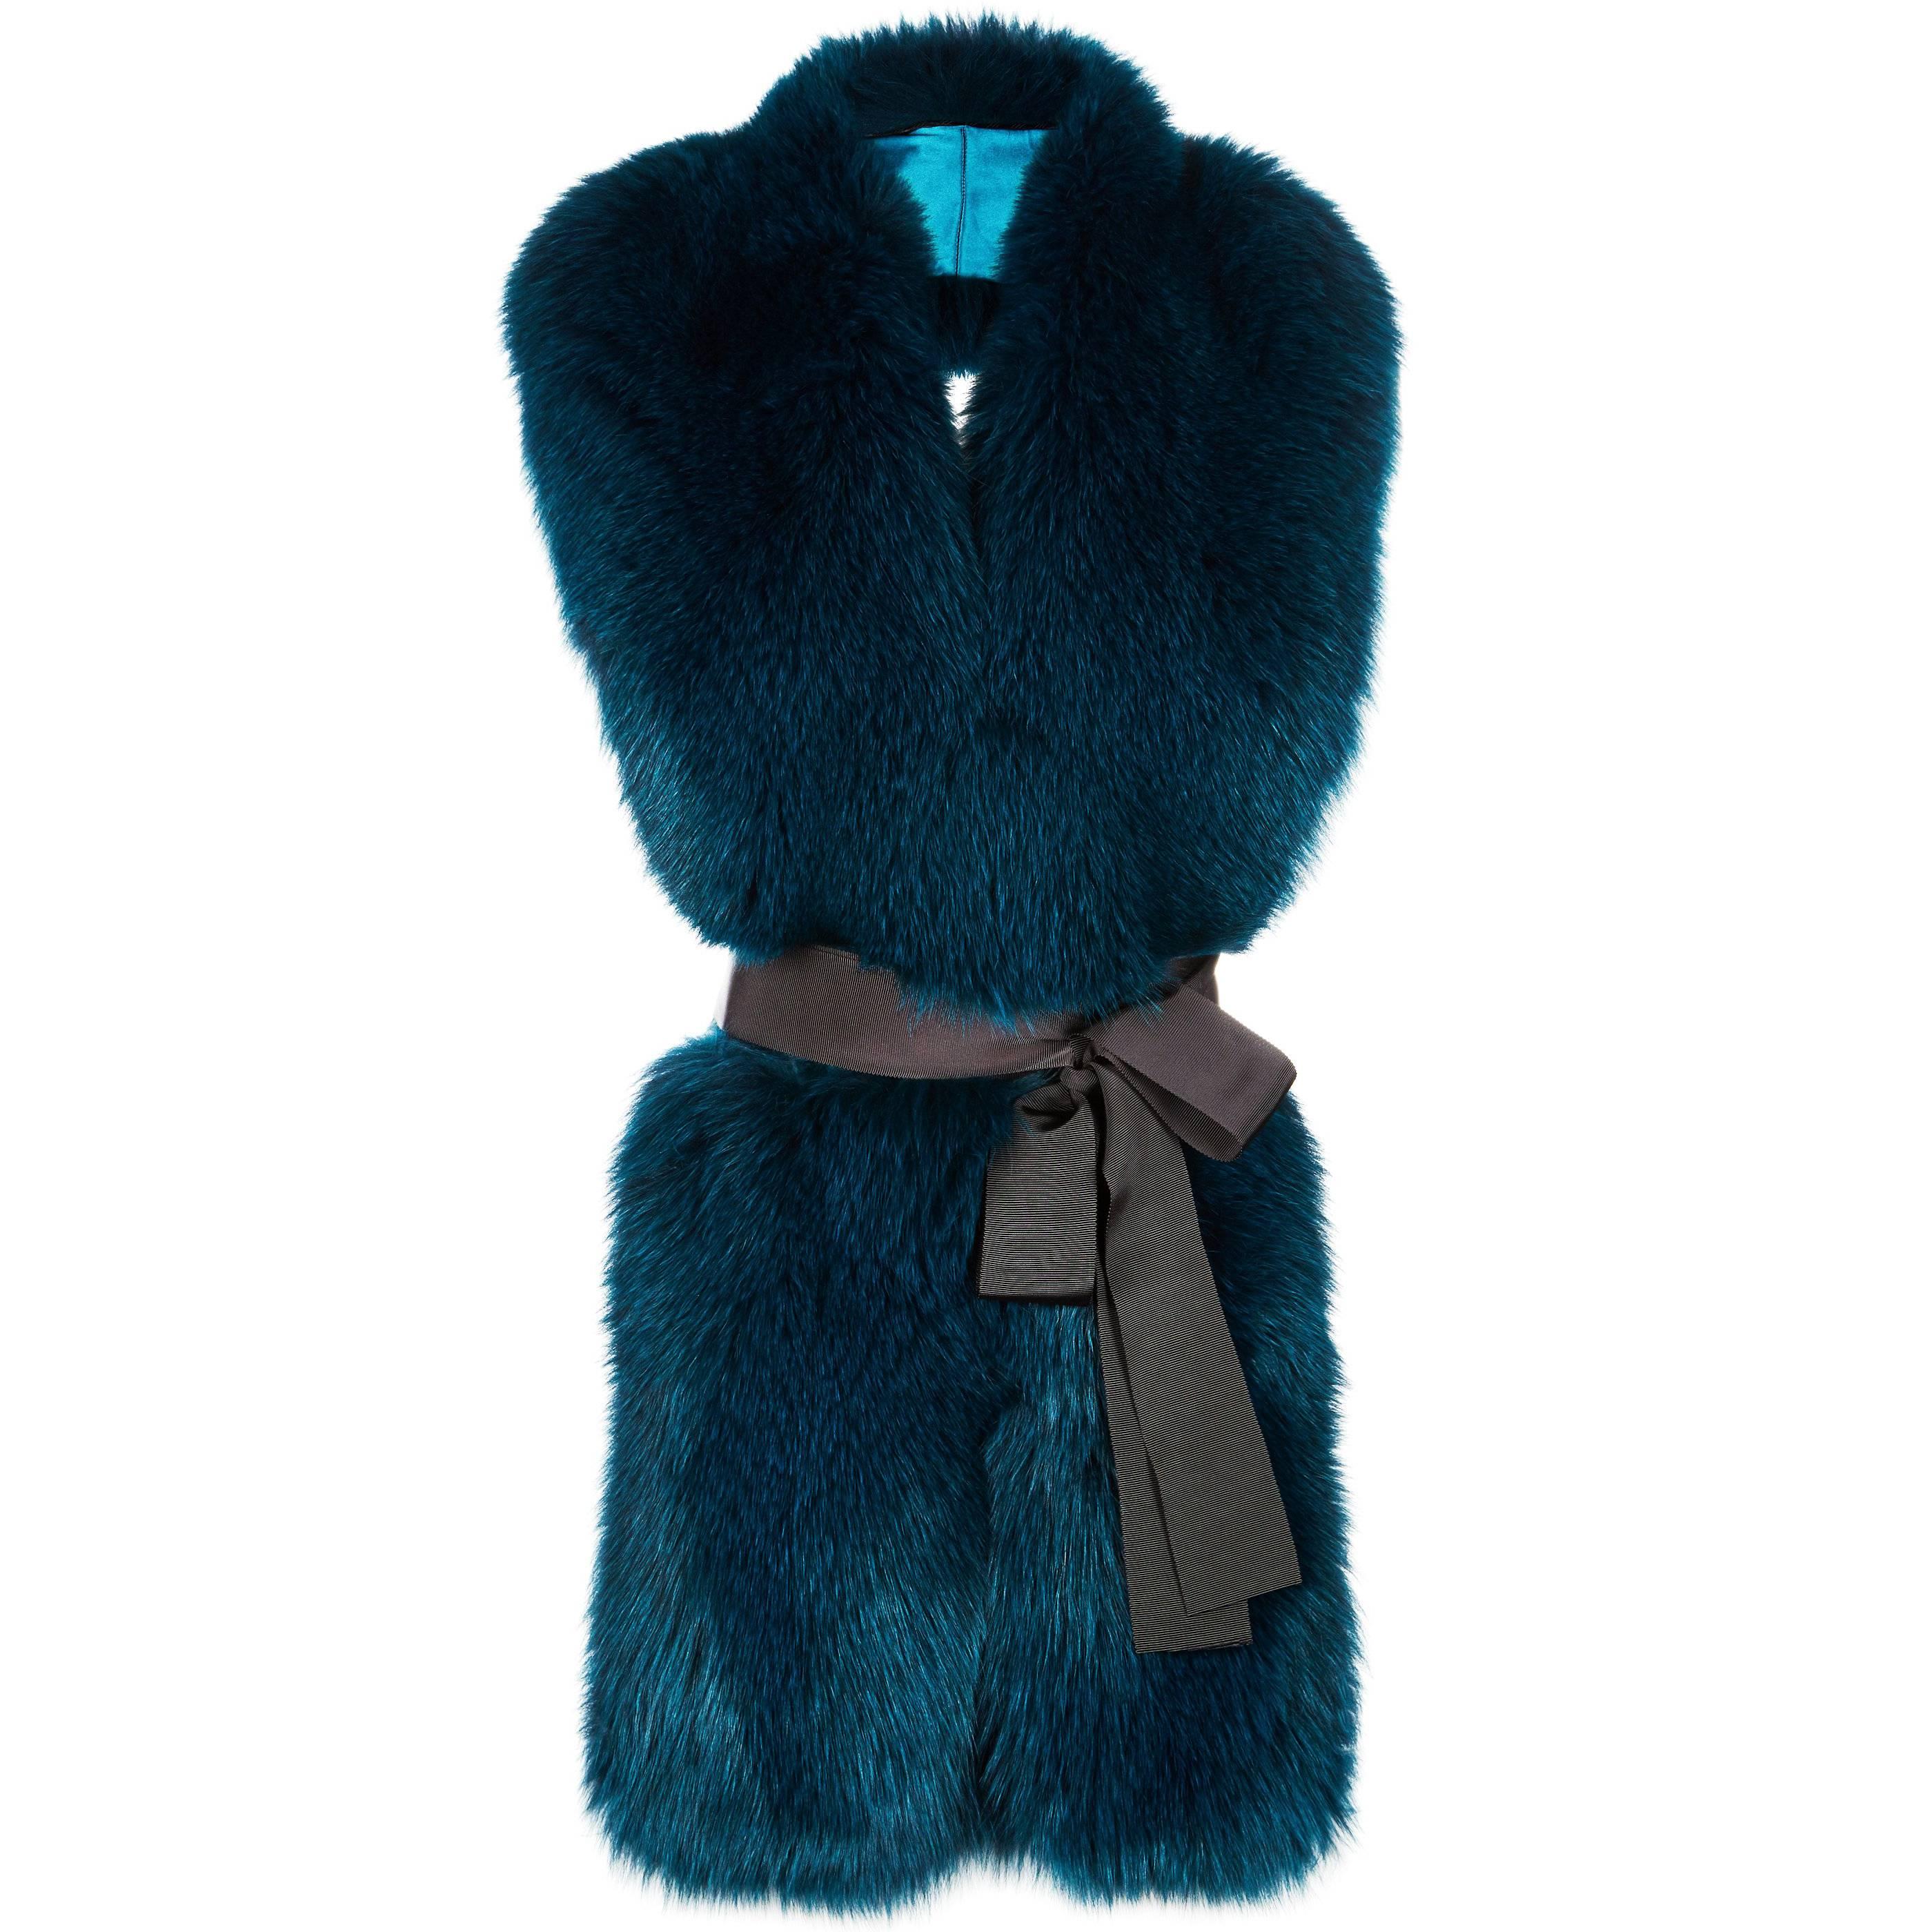 The perfect Christmas gift for someone special - monogramming available on request. 
The Legacy Stole is Verheyen London’s versatile design to be worn from day to night. Crafted in the finest dyed fox fur and lined in coloured silk satin.  A